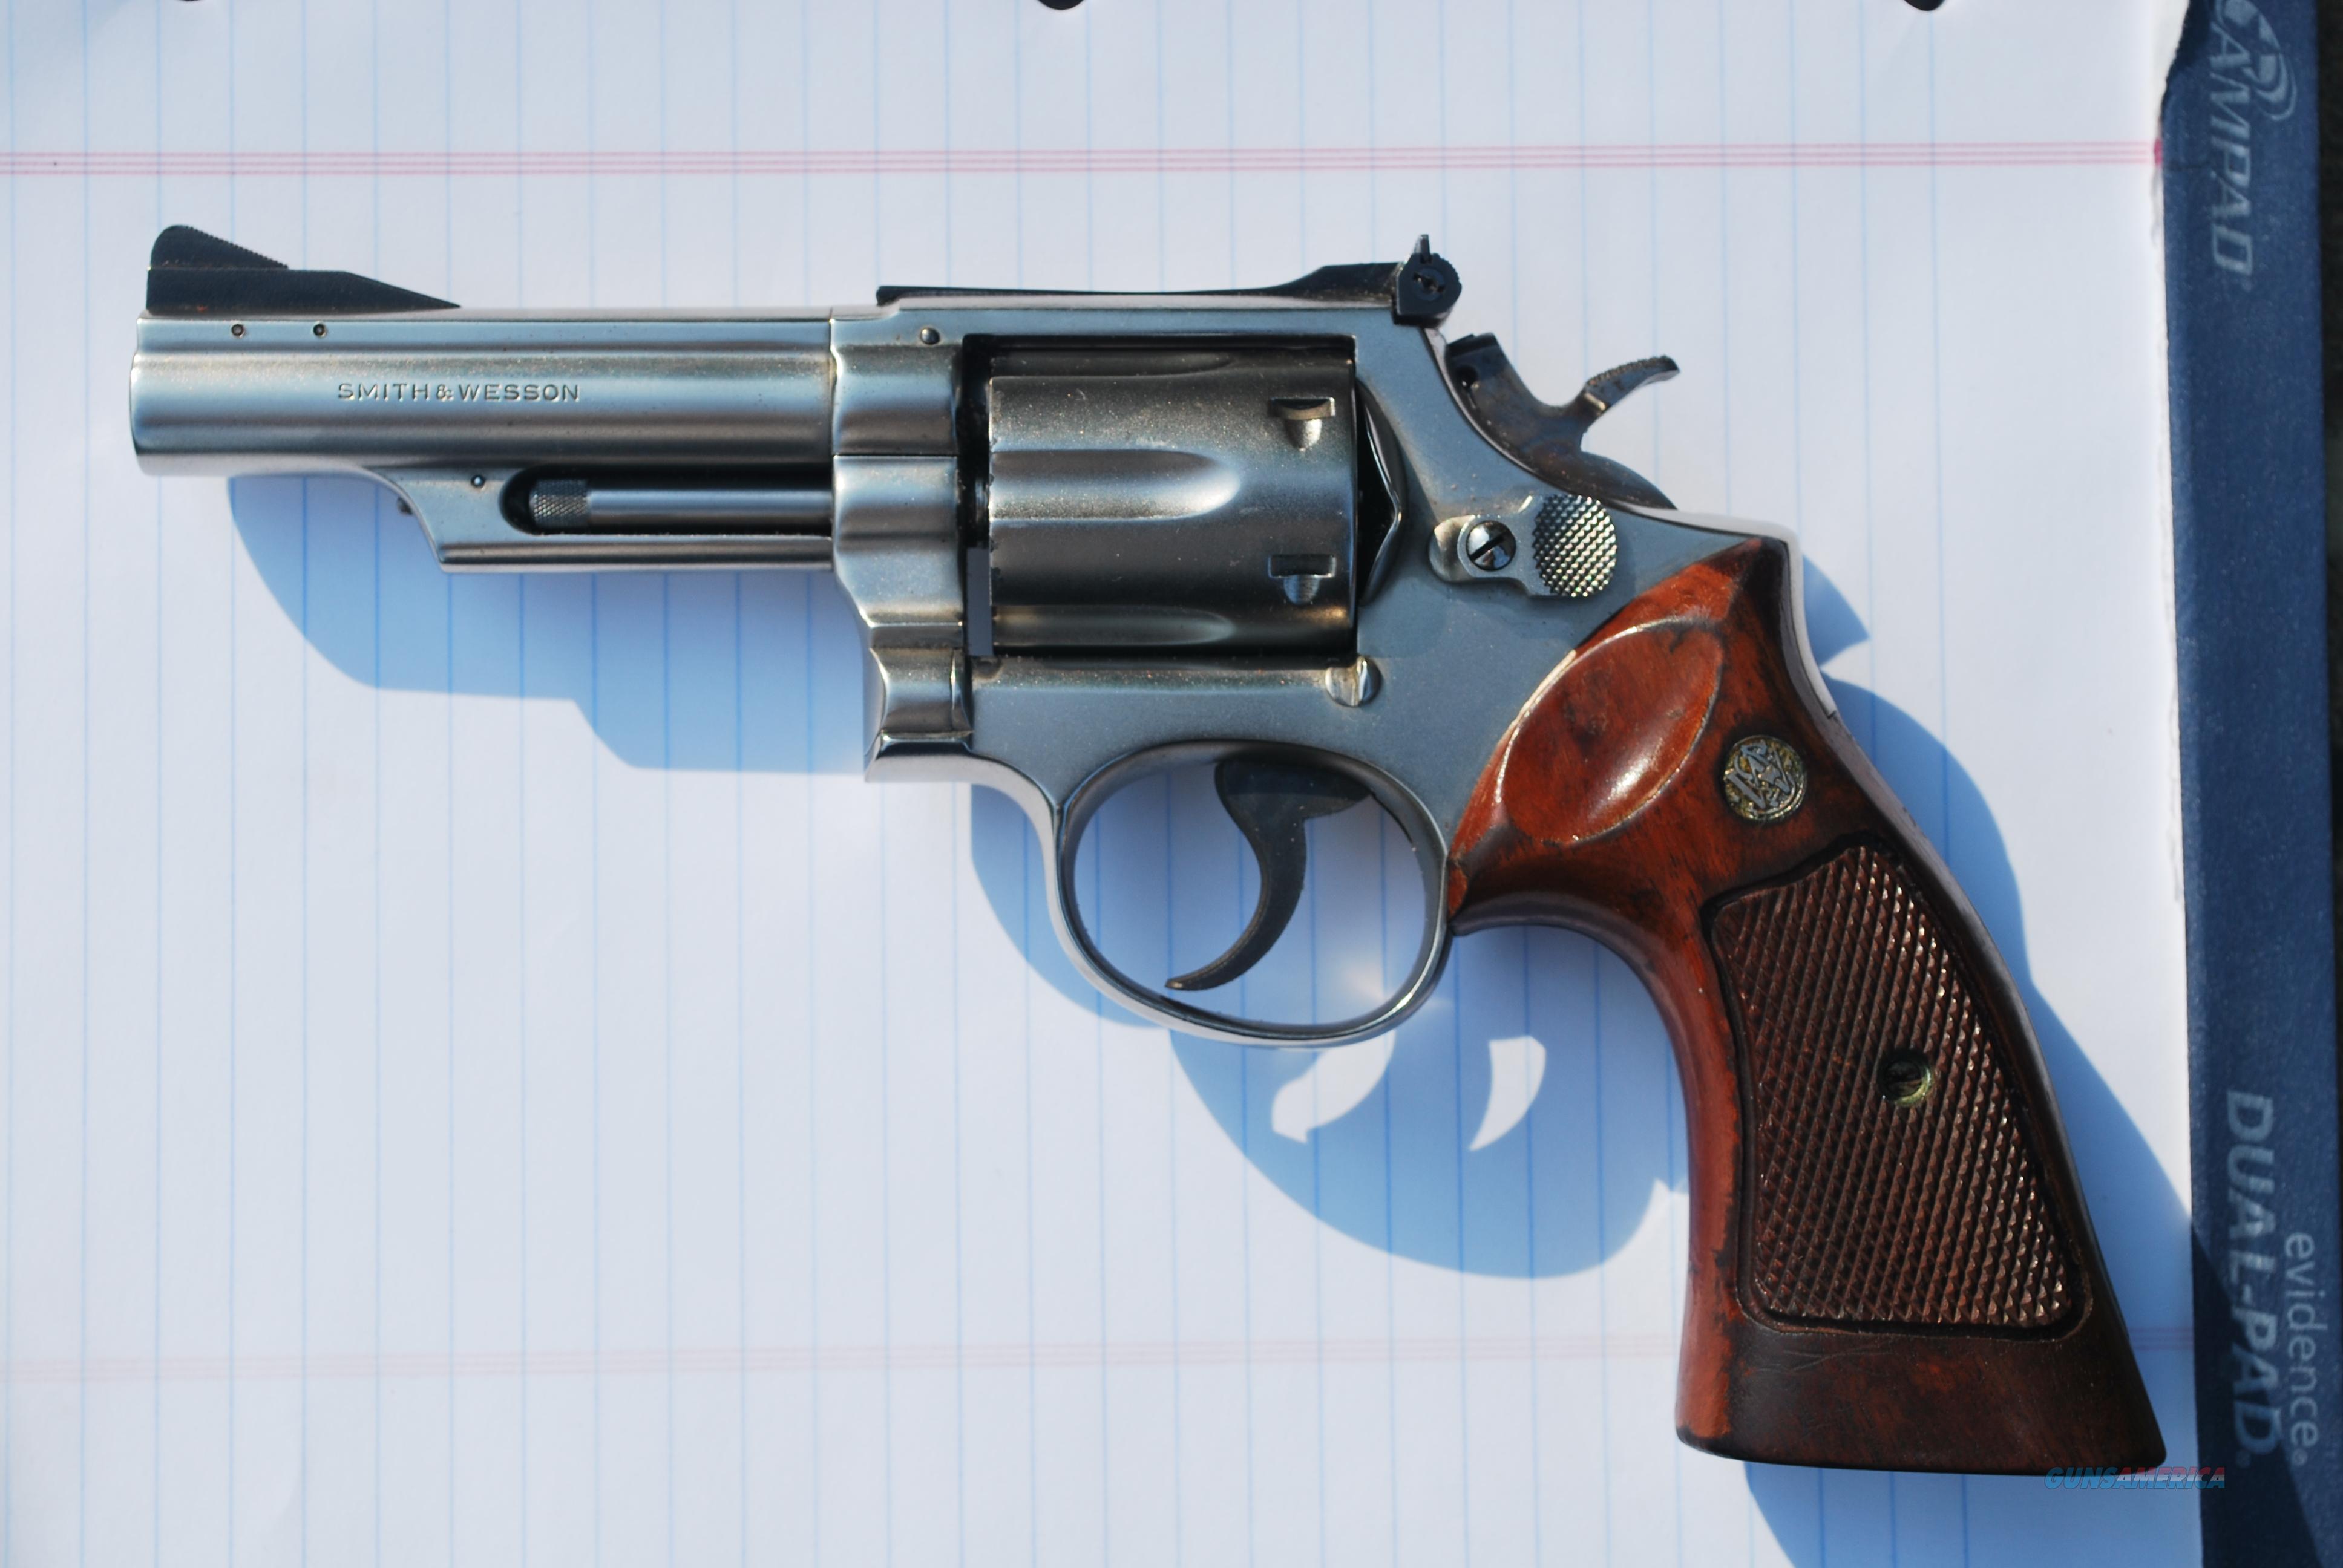 Smith and wesson 586 value